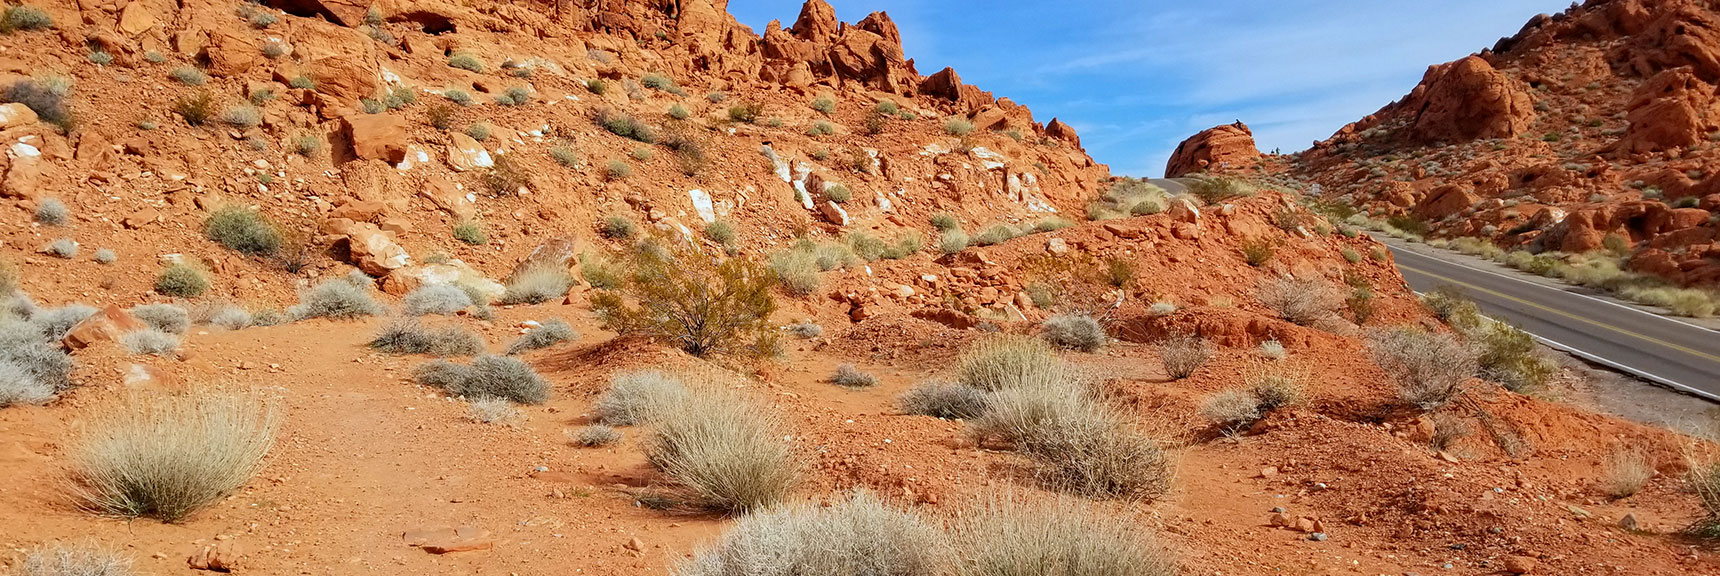 Circling Around the South Side of Elephant Rock Loop in Valley of Fire State Park, Nevada